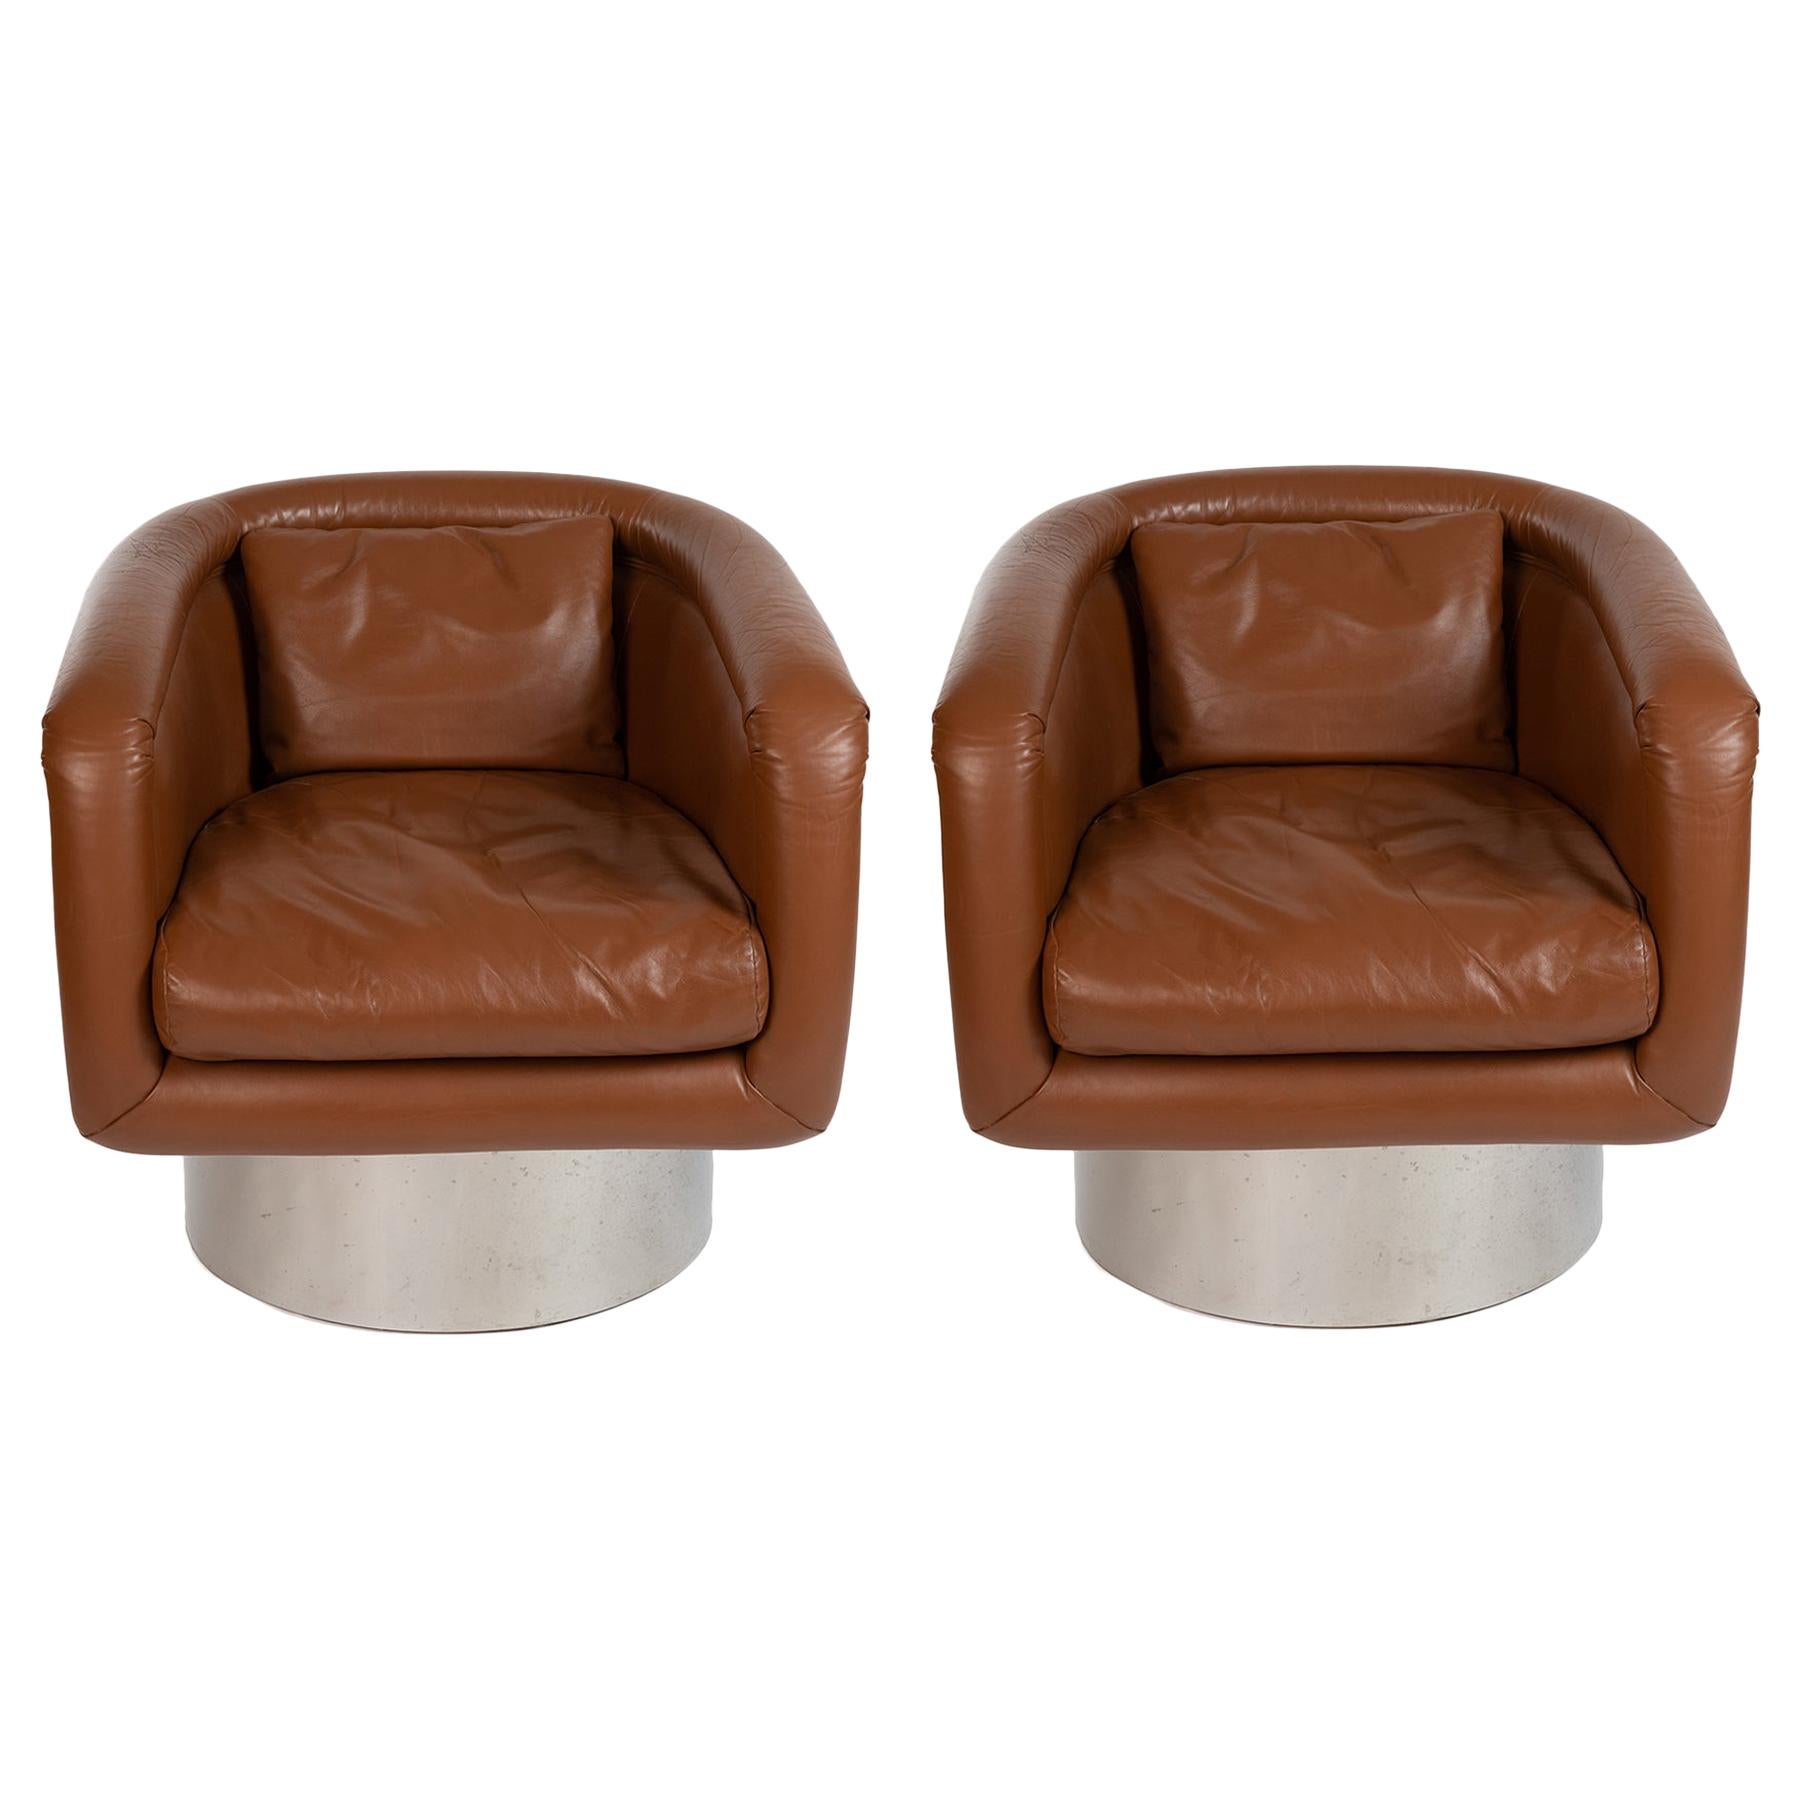 Leon Rosen for Pace Pair of Leather and Steel Swivel Chairs